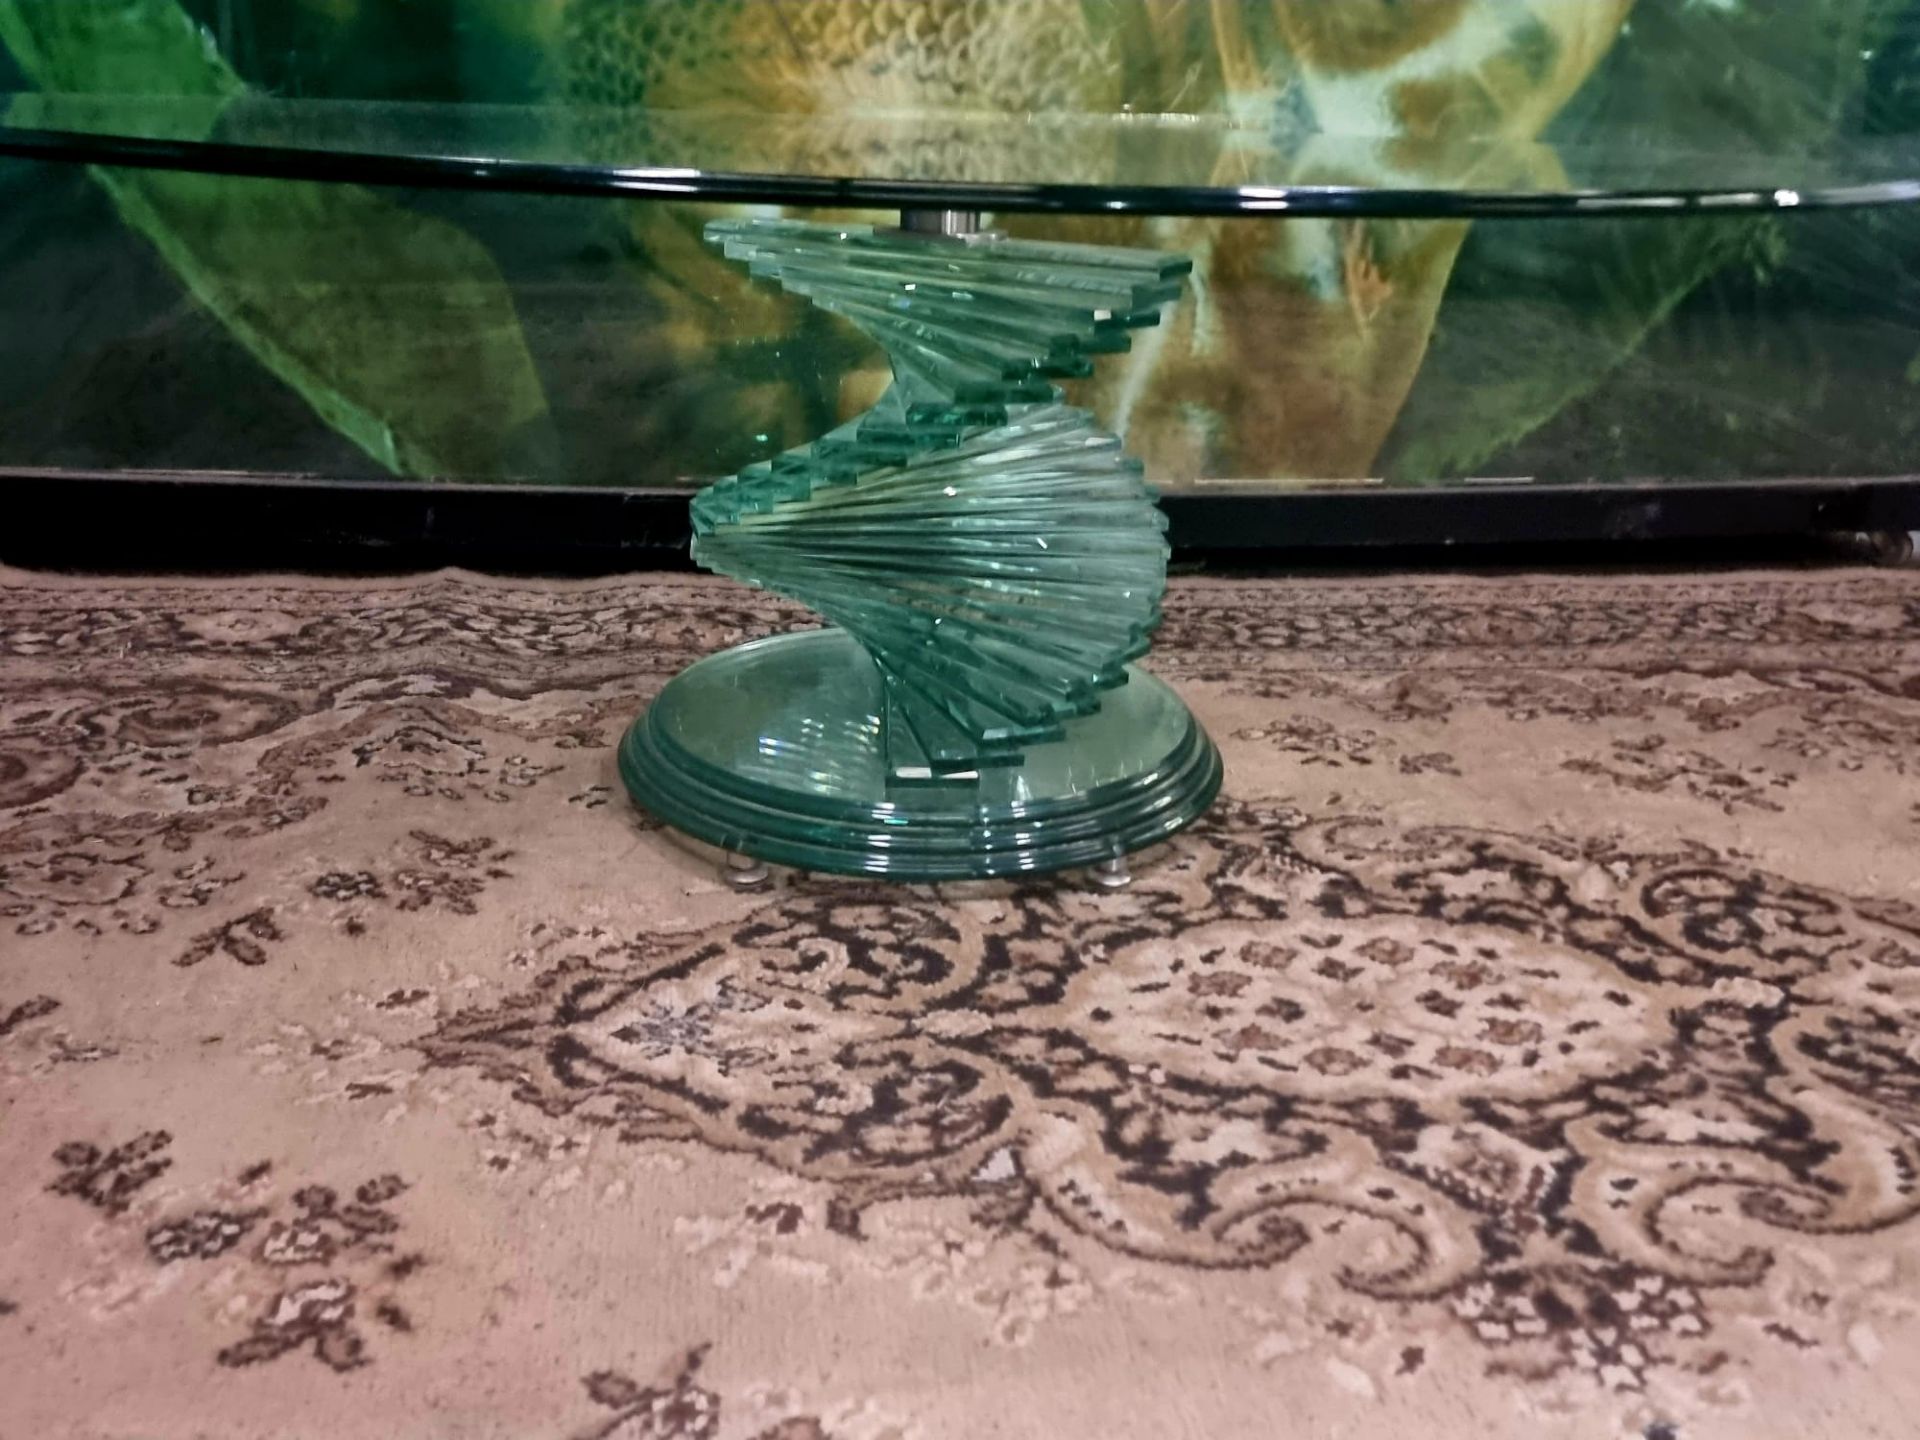 Ravello Spiral Glass Italian Design Ovoid Coffee Table A Mid Century Design Table With A Light Green - Image 8 of 8